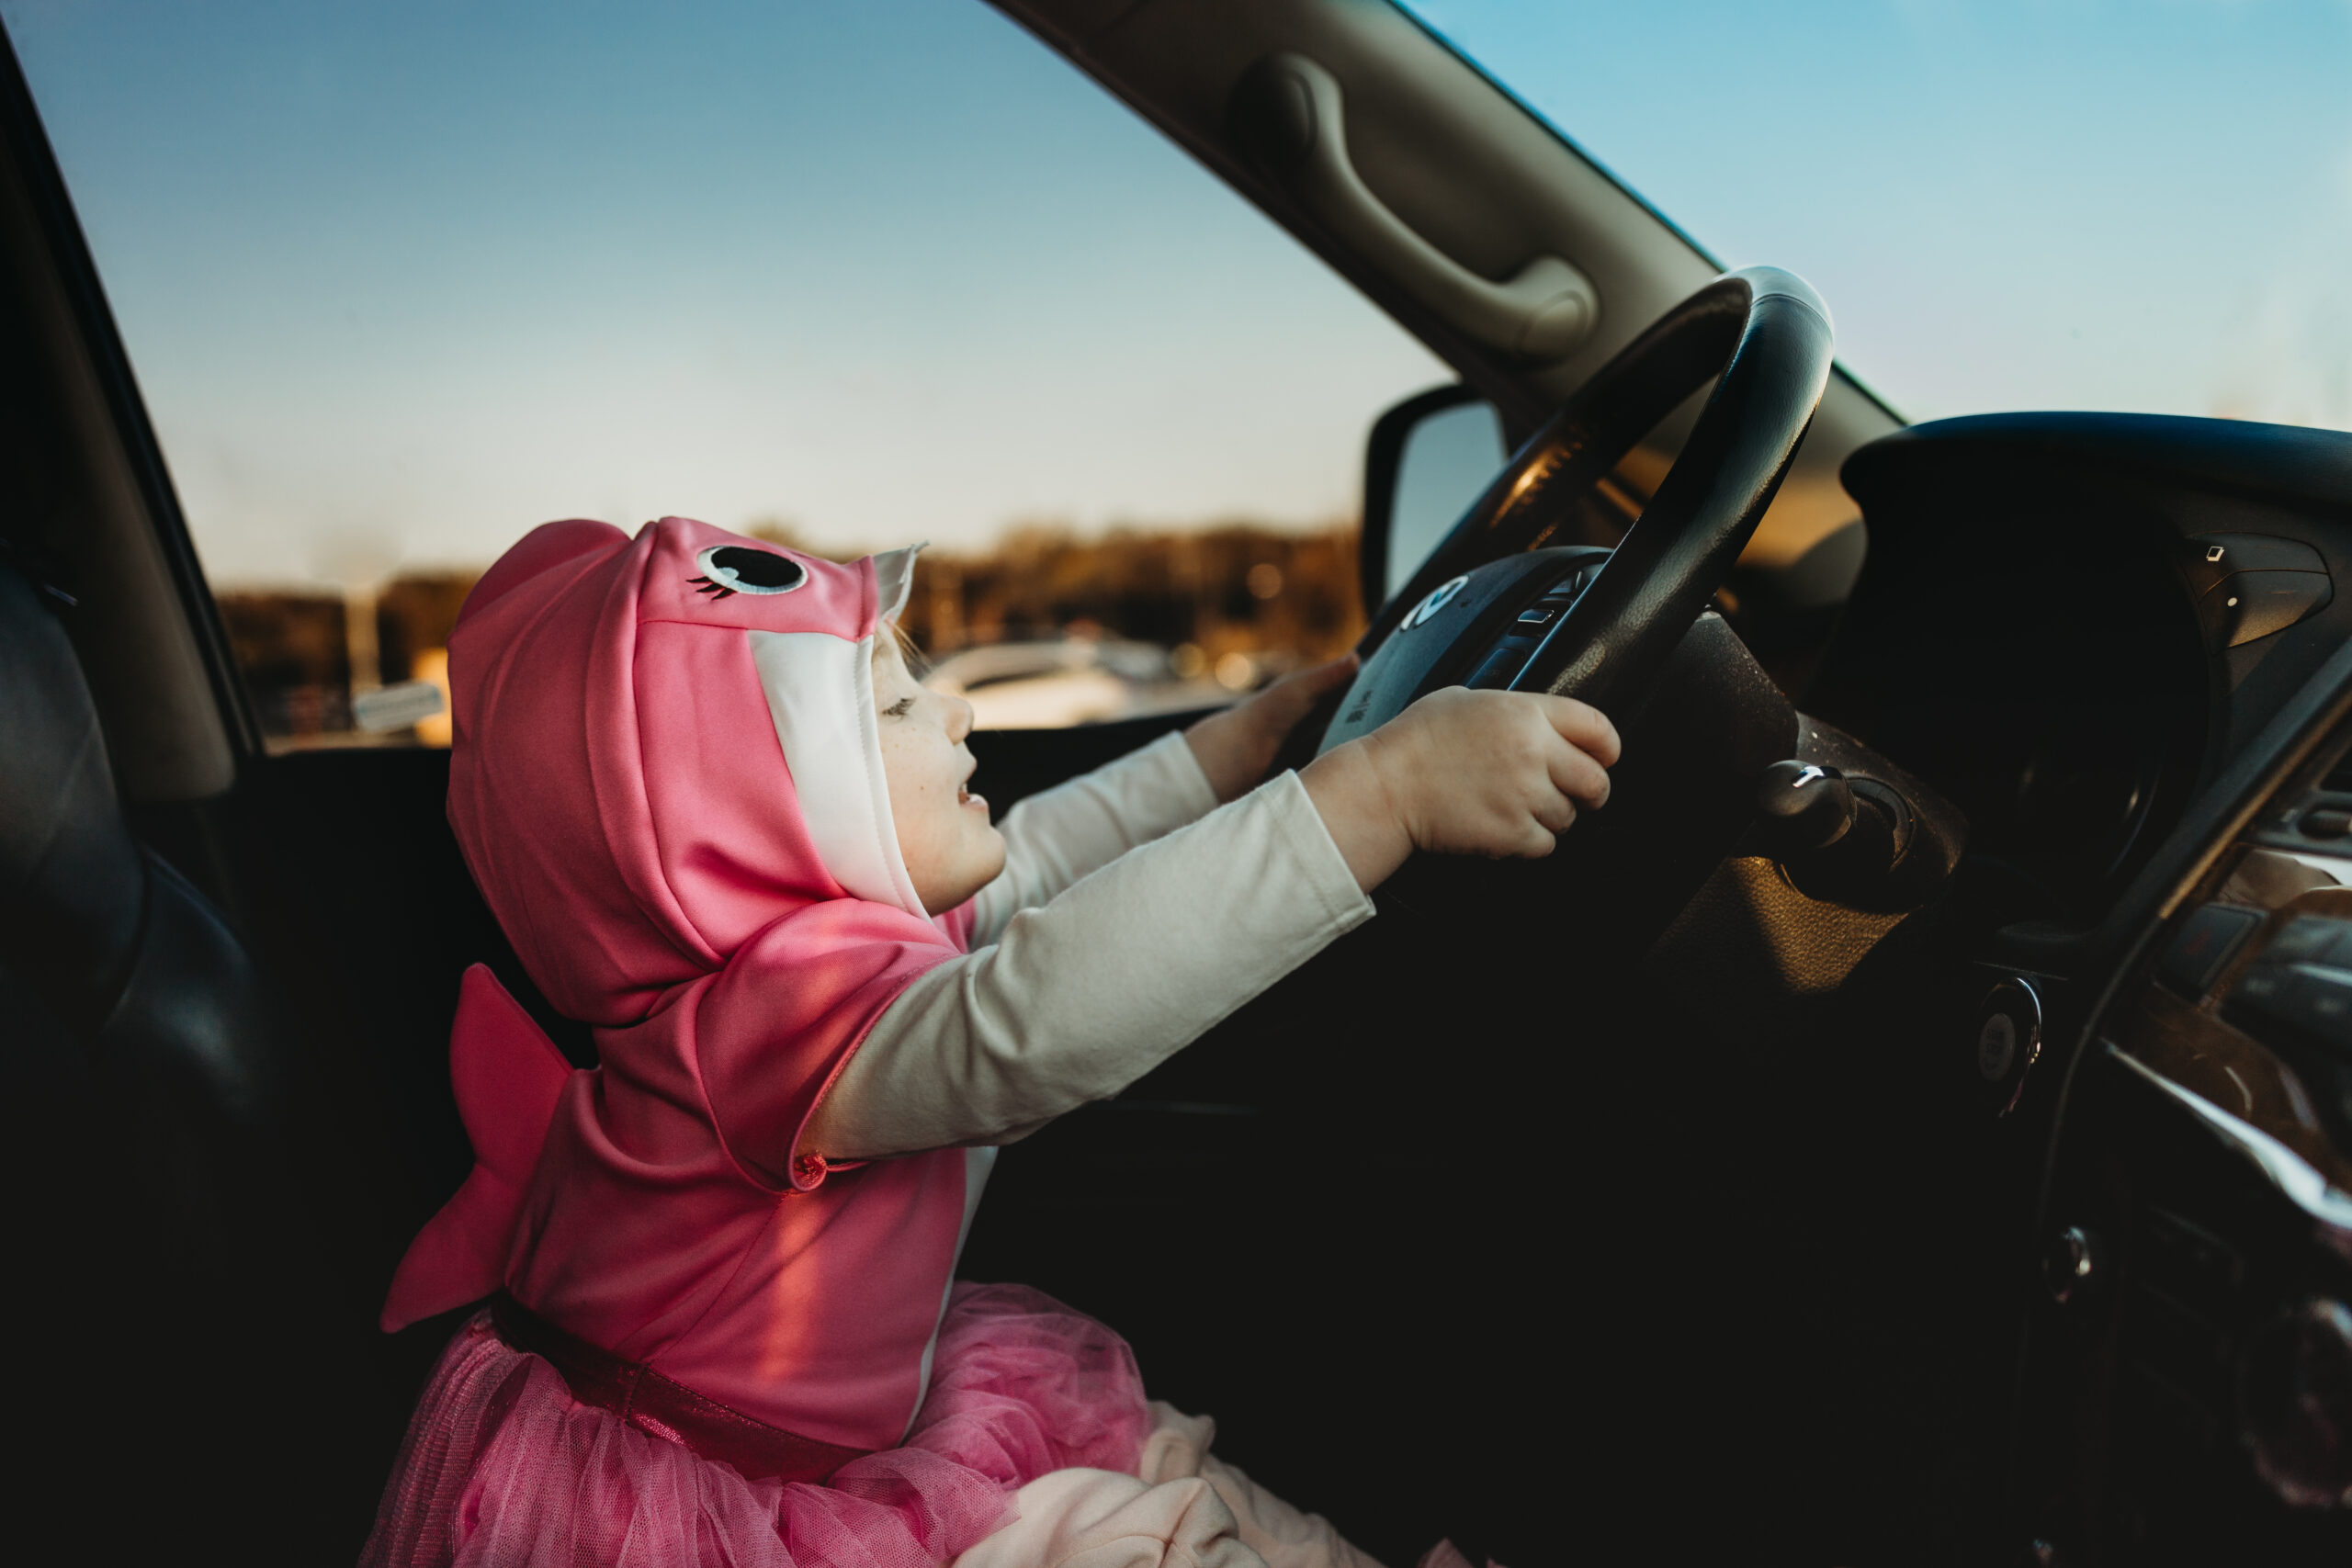 Little girl in the drivers seat of a parked car